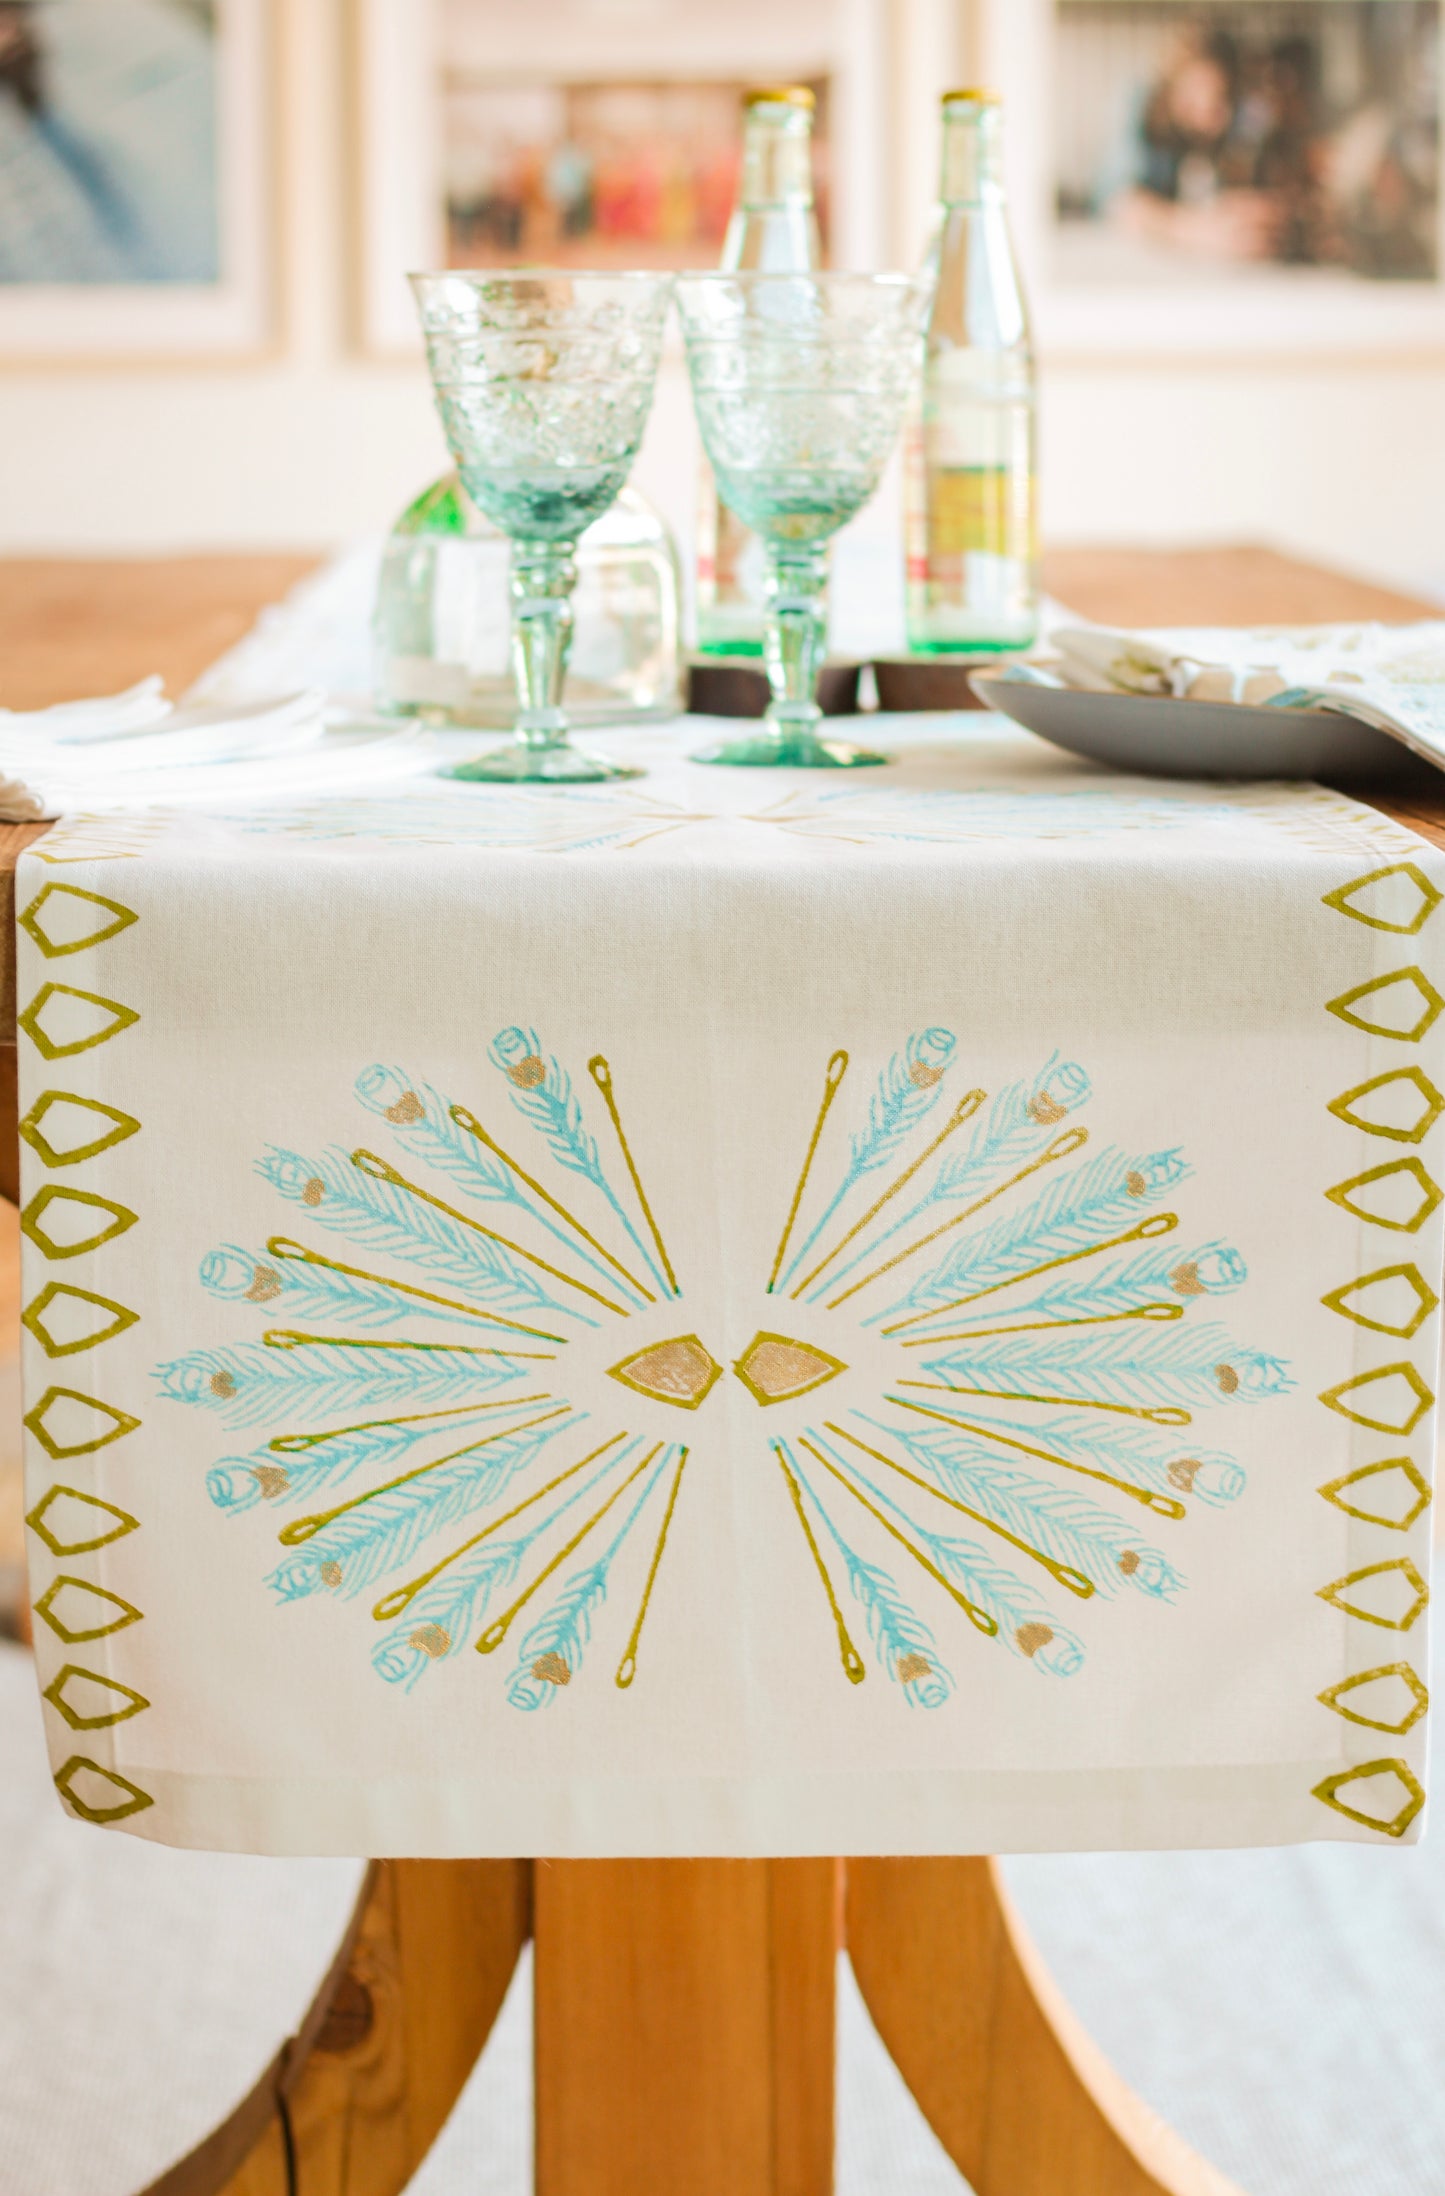 Table Runner - Peacock, Surf & Cactus